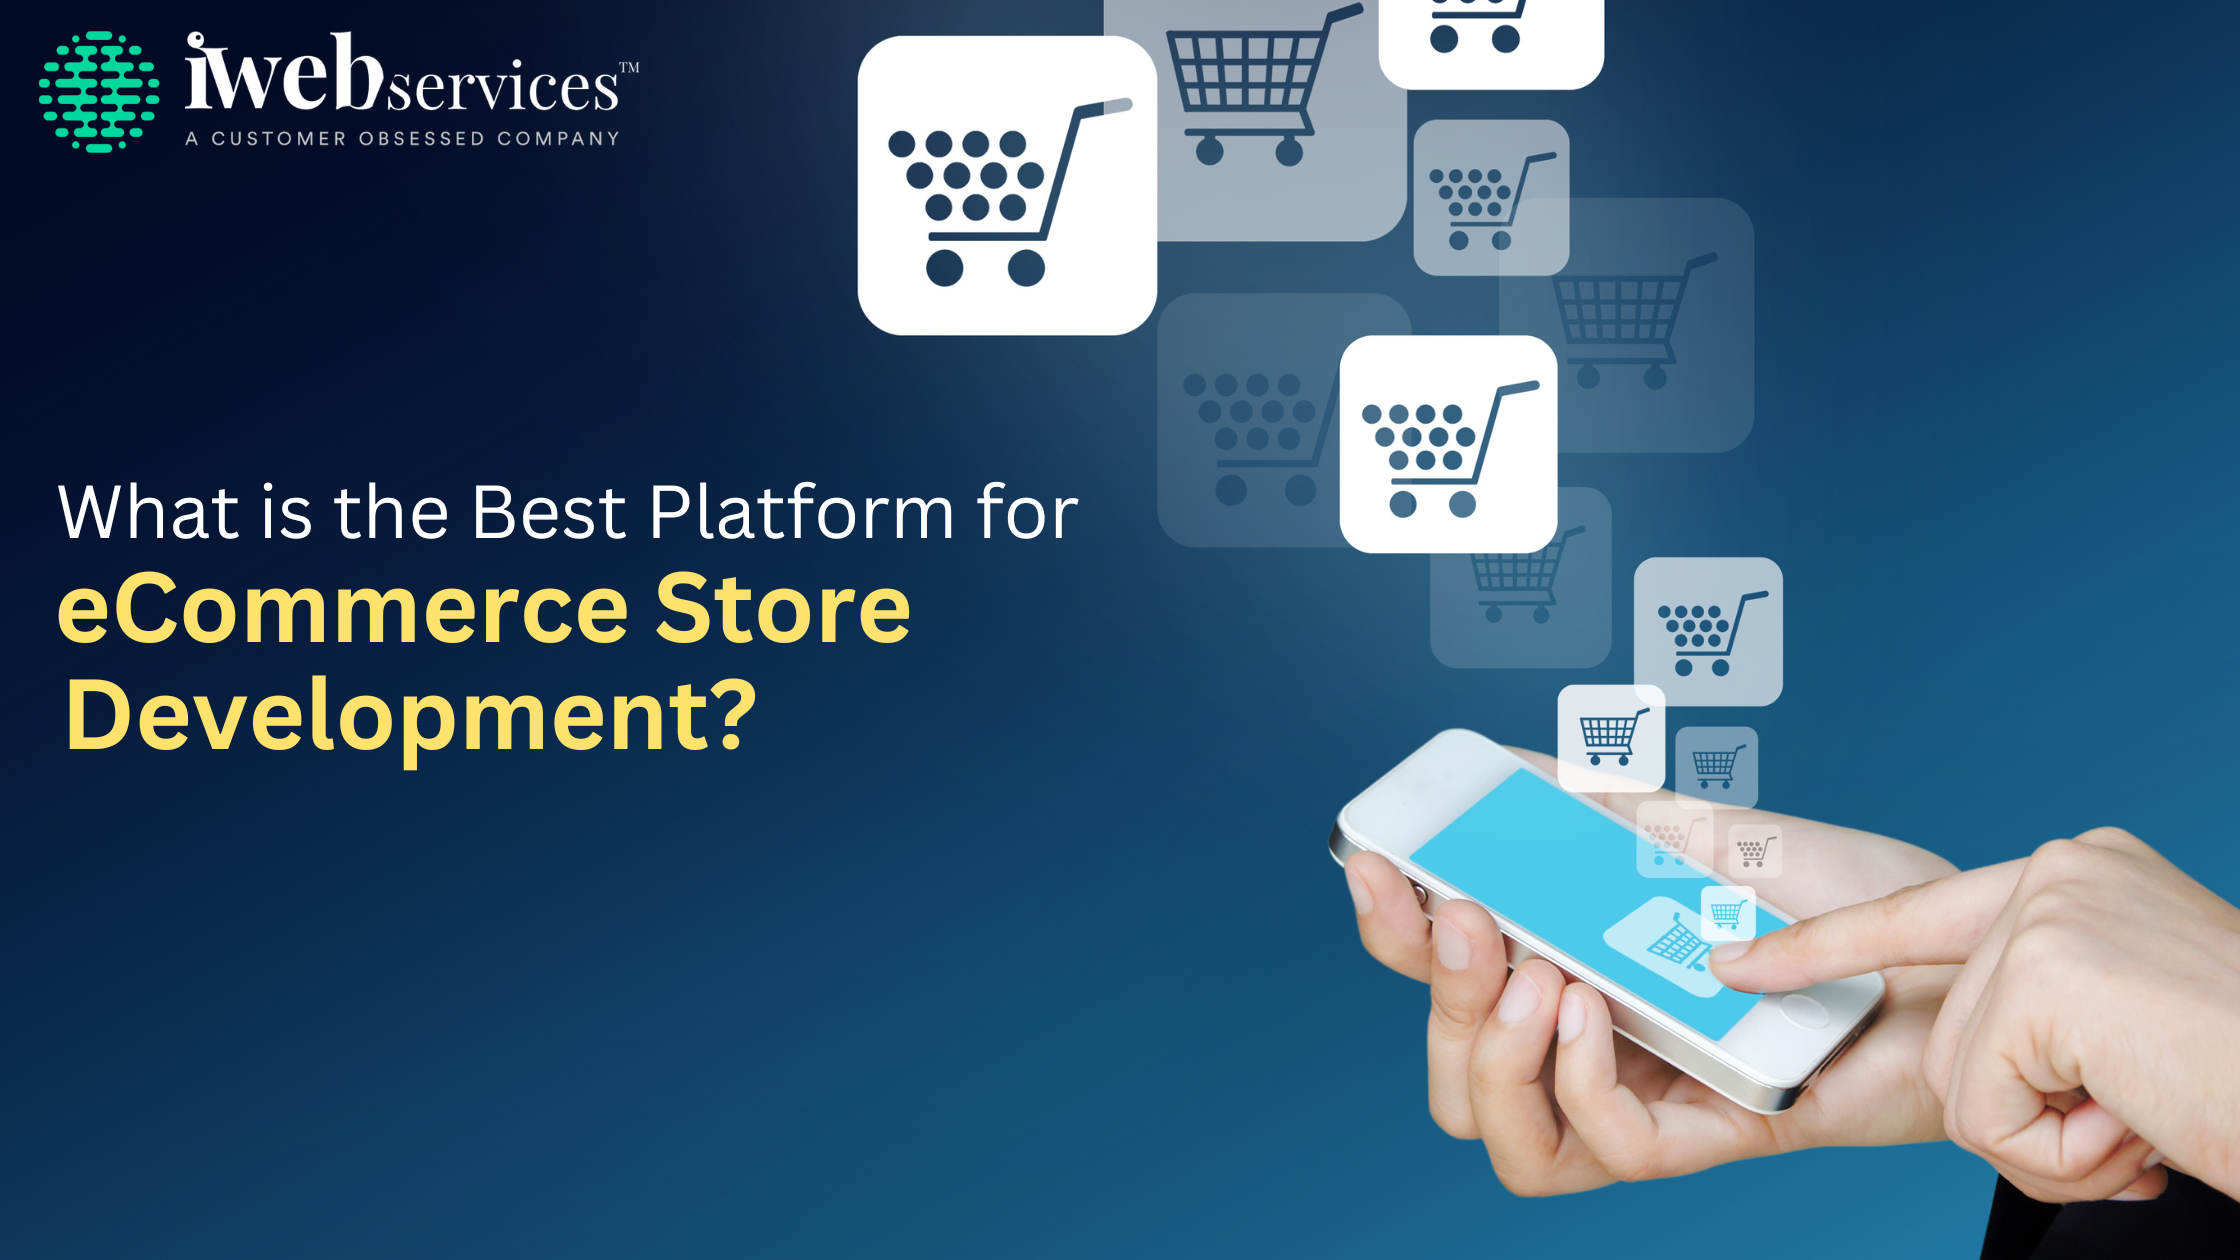 What is the Best Platform for eCommerce Store Development?